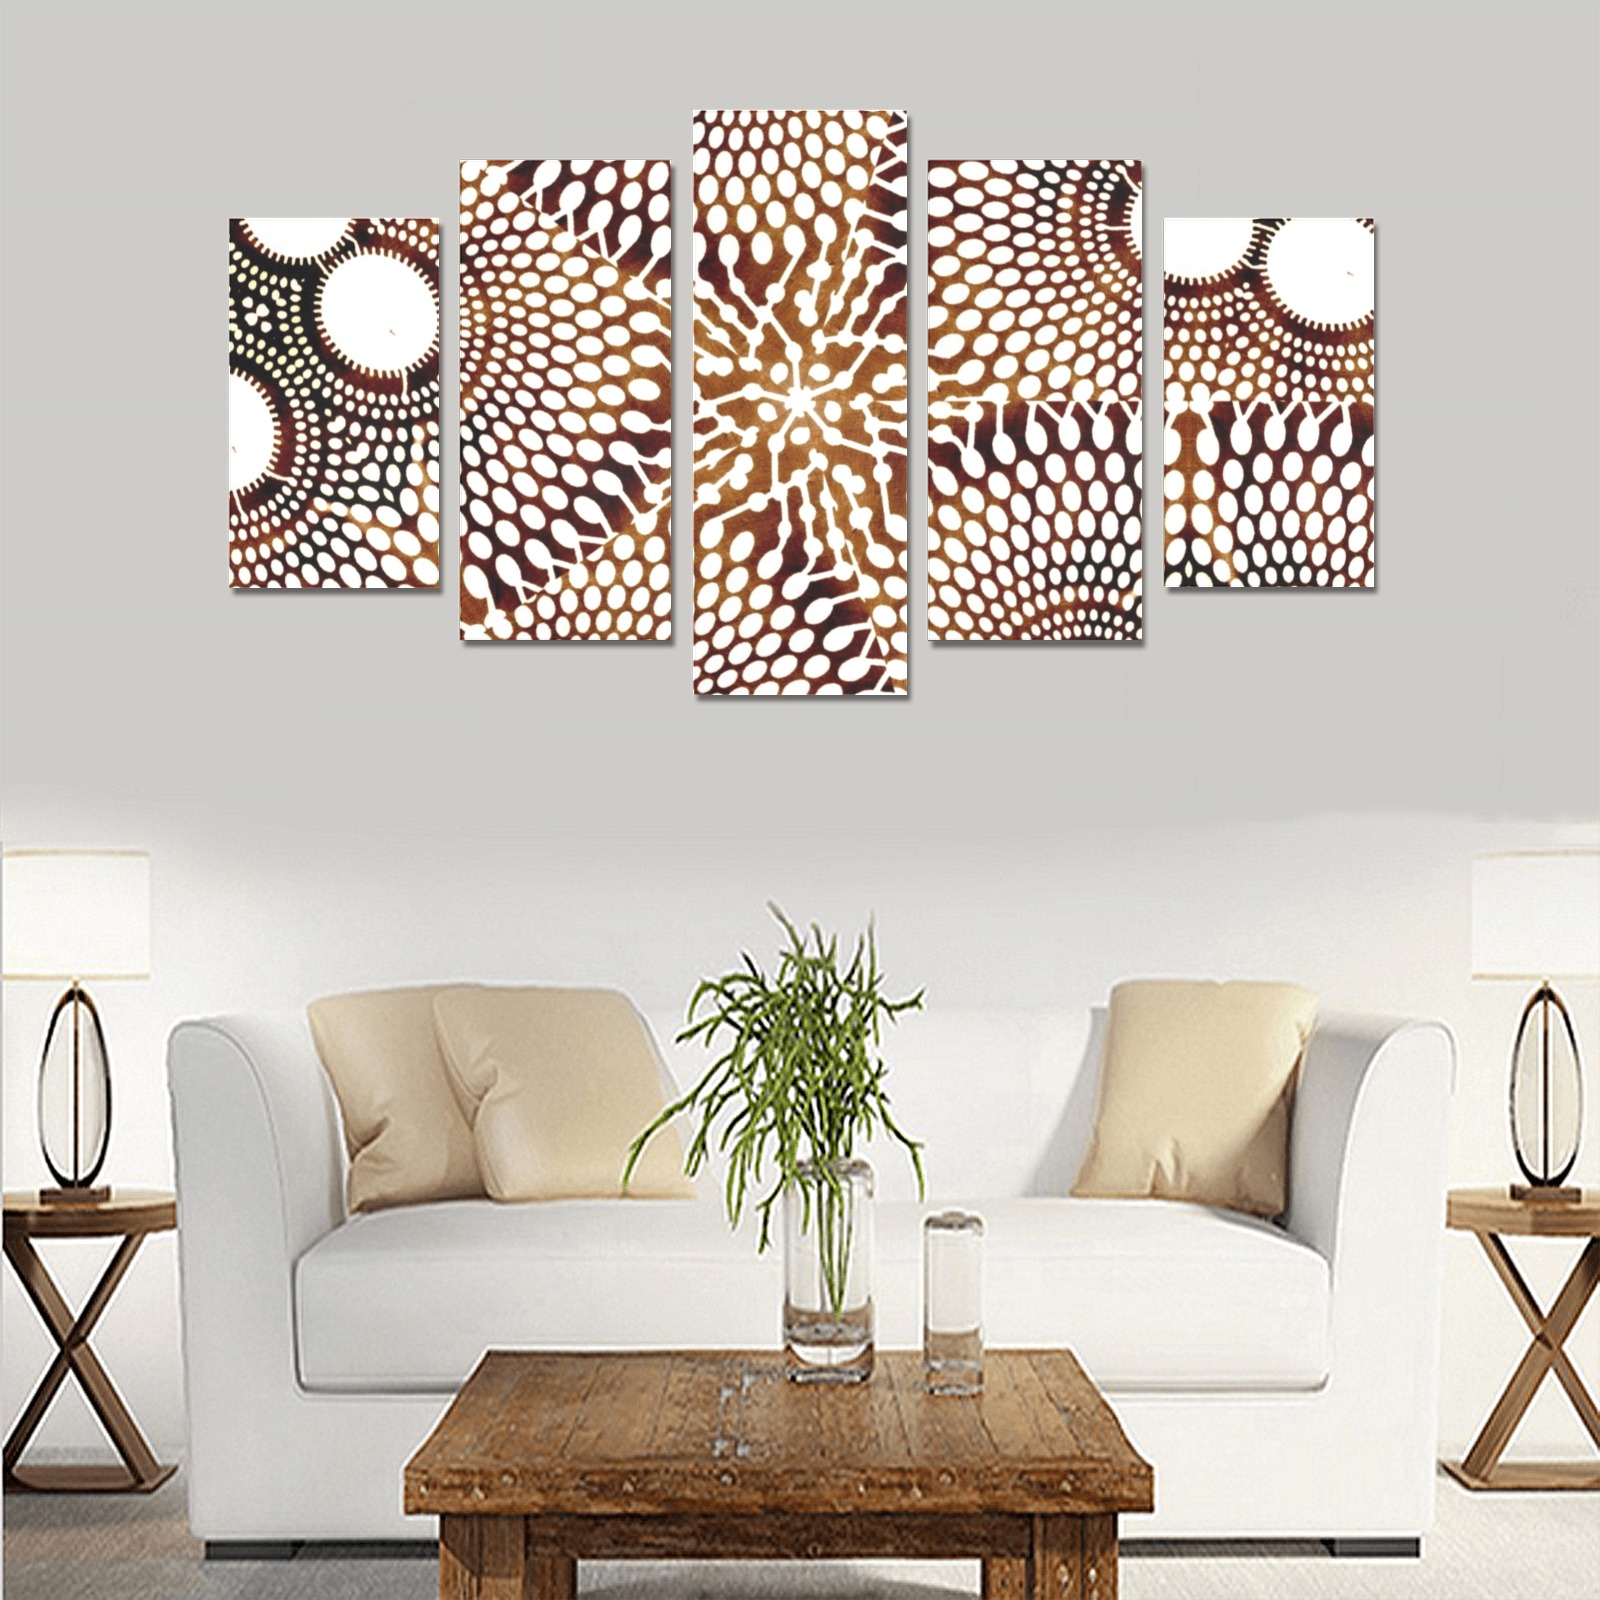 AFRICAN PRINT PATTERN 4 Canvas Print Sets A (No Frame)